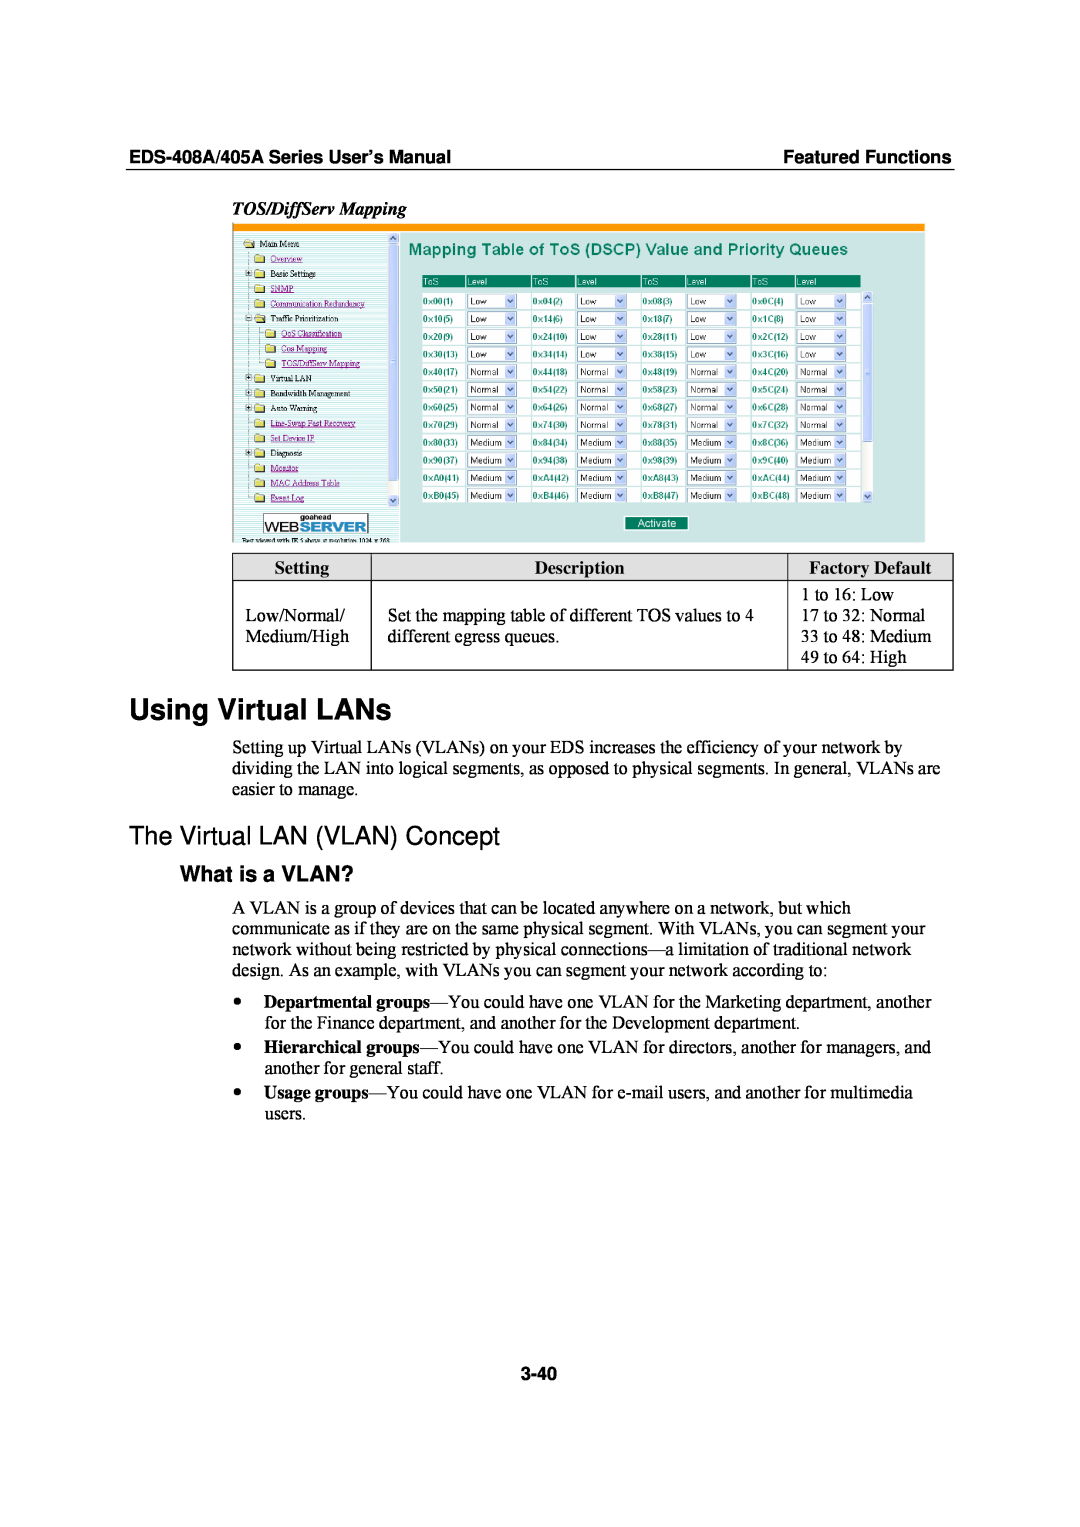 Moxa Technologies EDS-405A Using Virtual LANs, The Virtual LAN VLAN Concept, What is a VLAN?, TOS/DiffServ Mapping, 3-40 